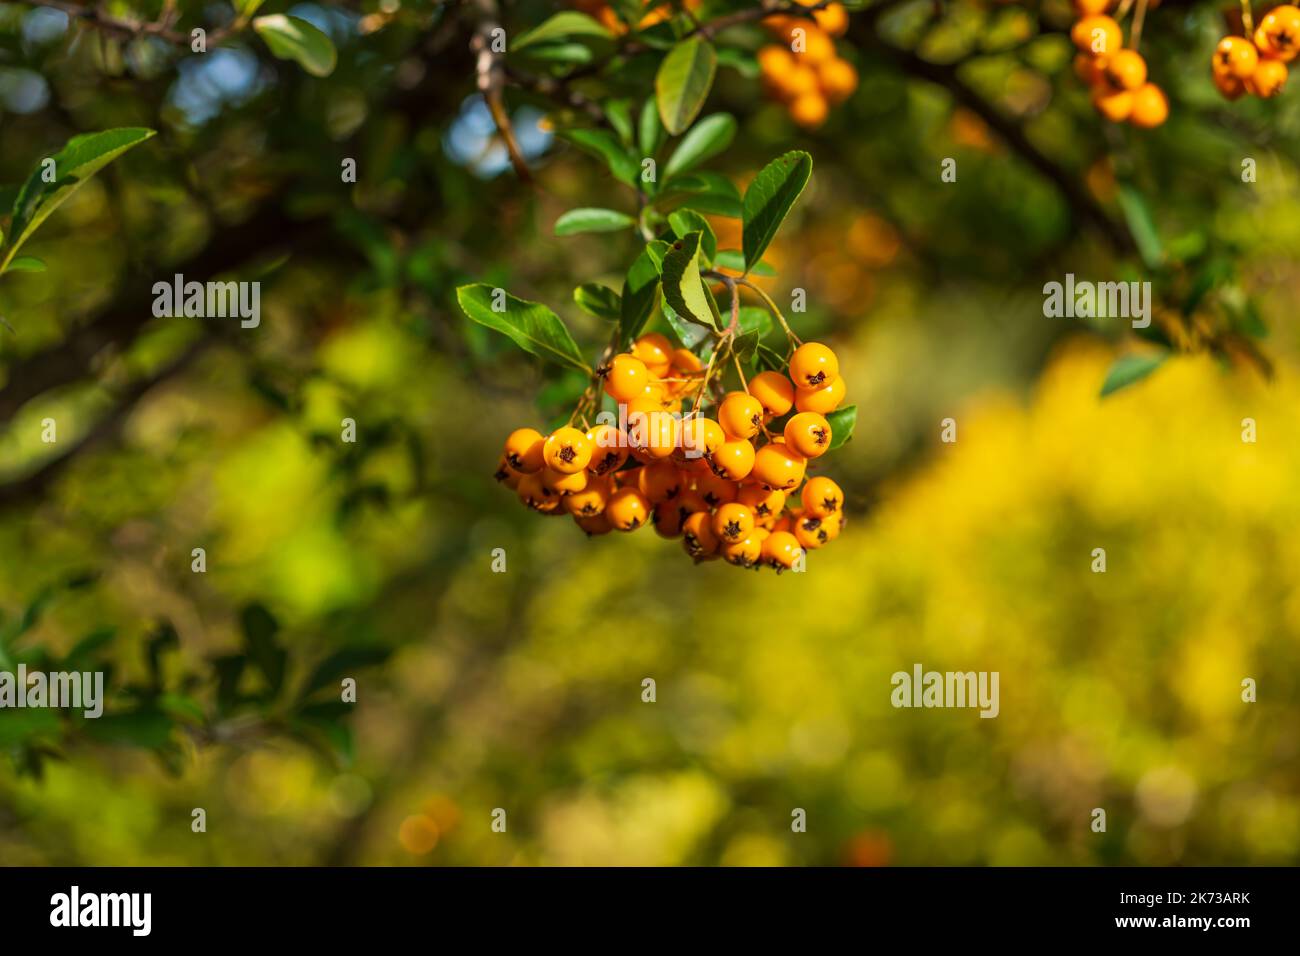 Pyracantha coccinea Soleil dOr decorative thorny shrub with many beautiful yellow fruits, golden colors Stock Photo